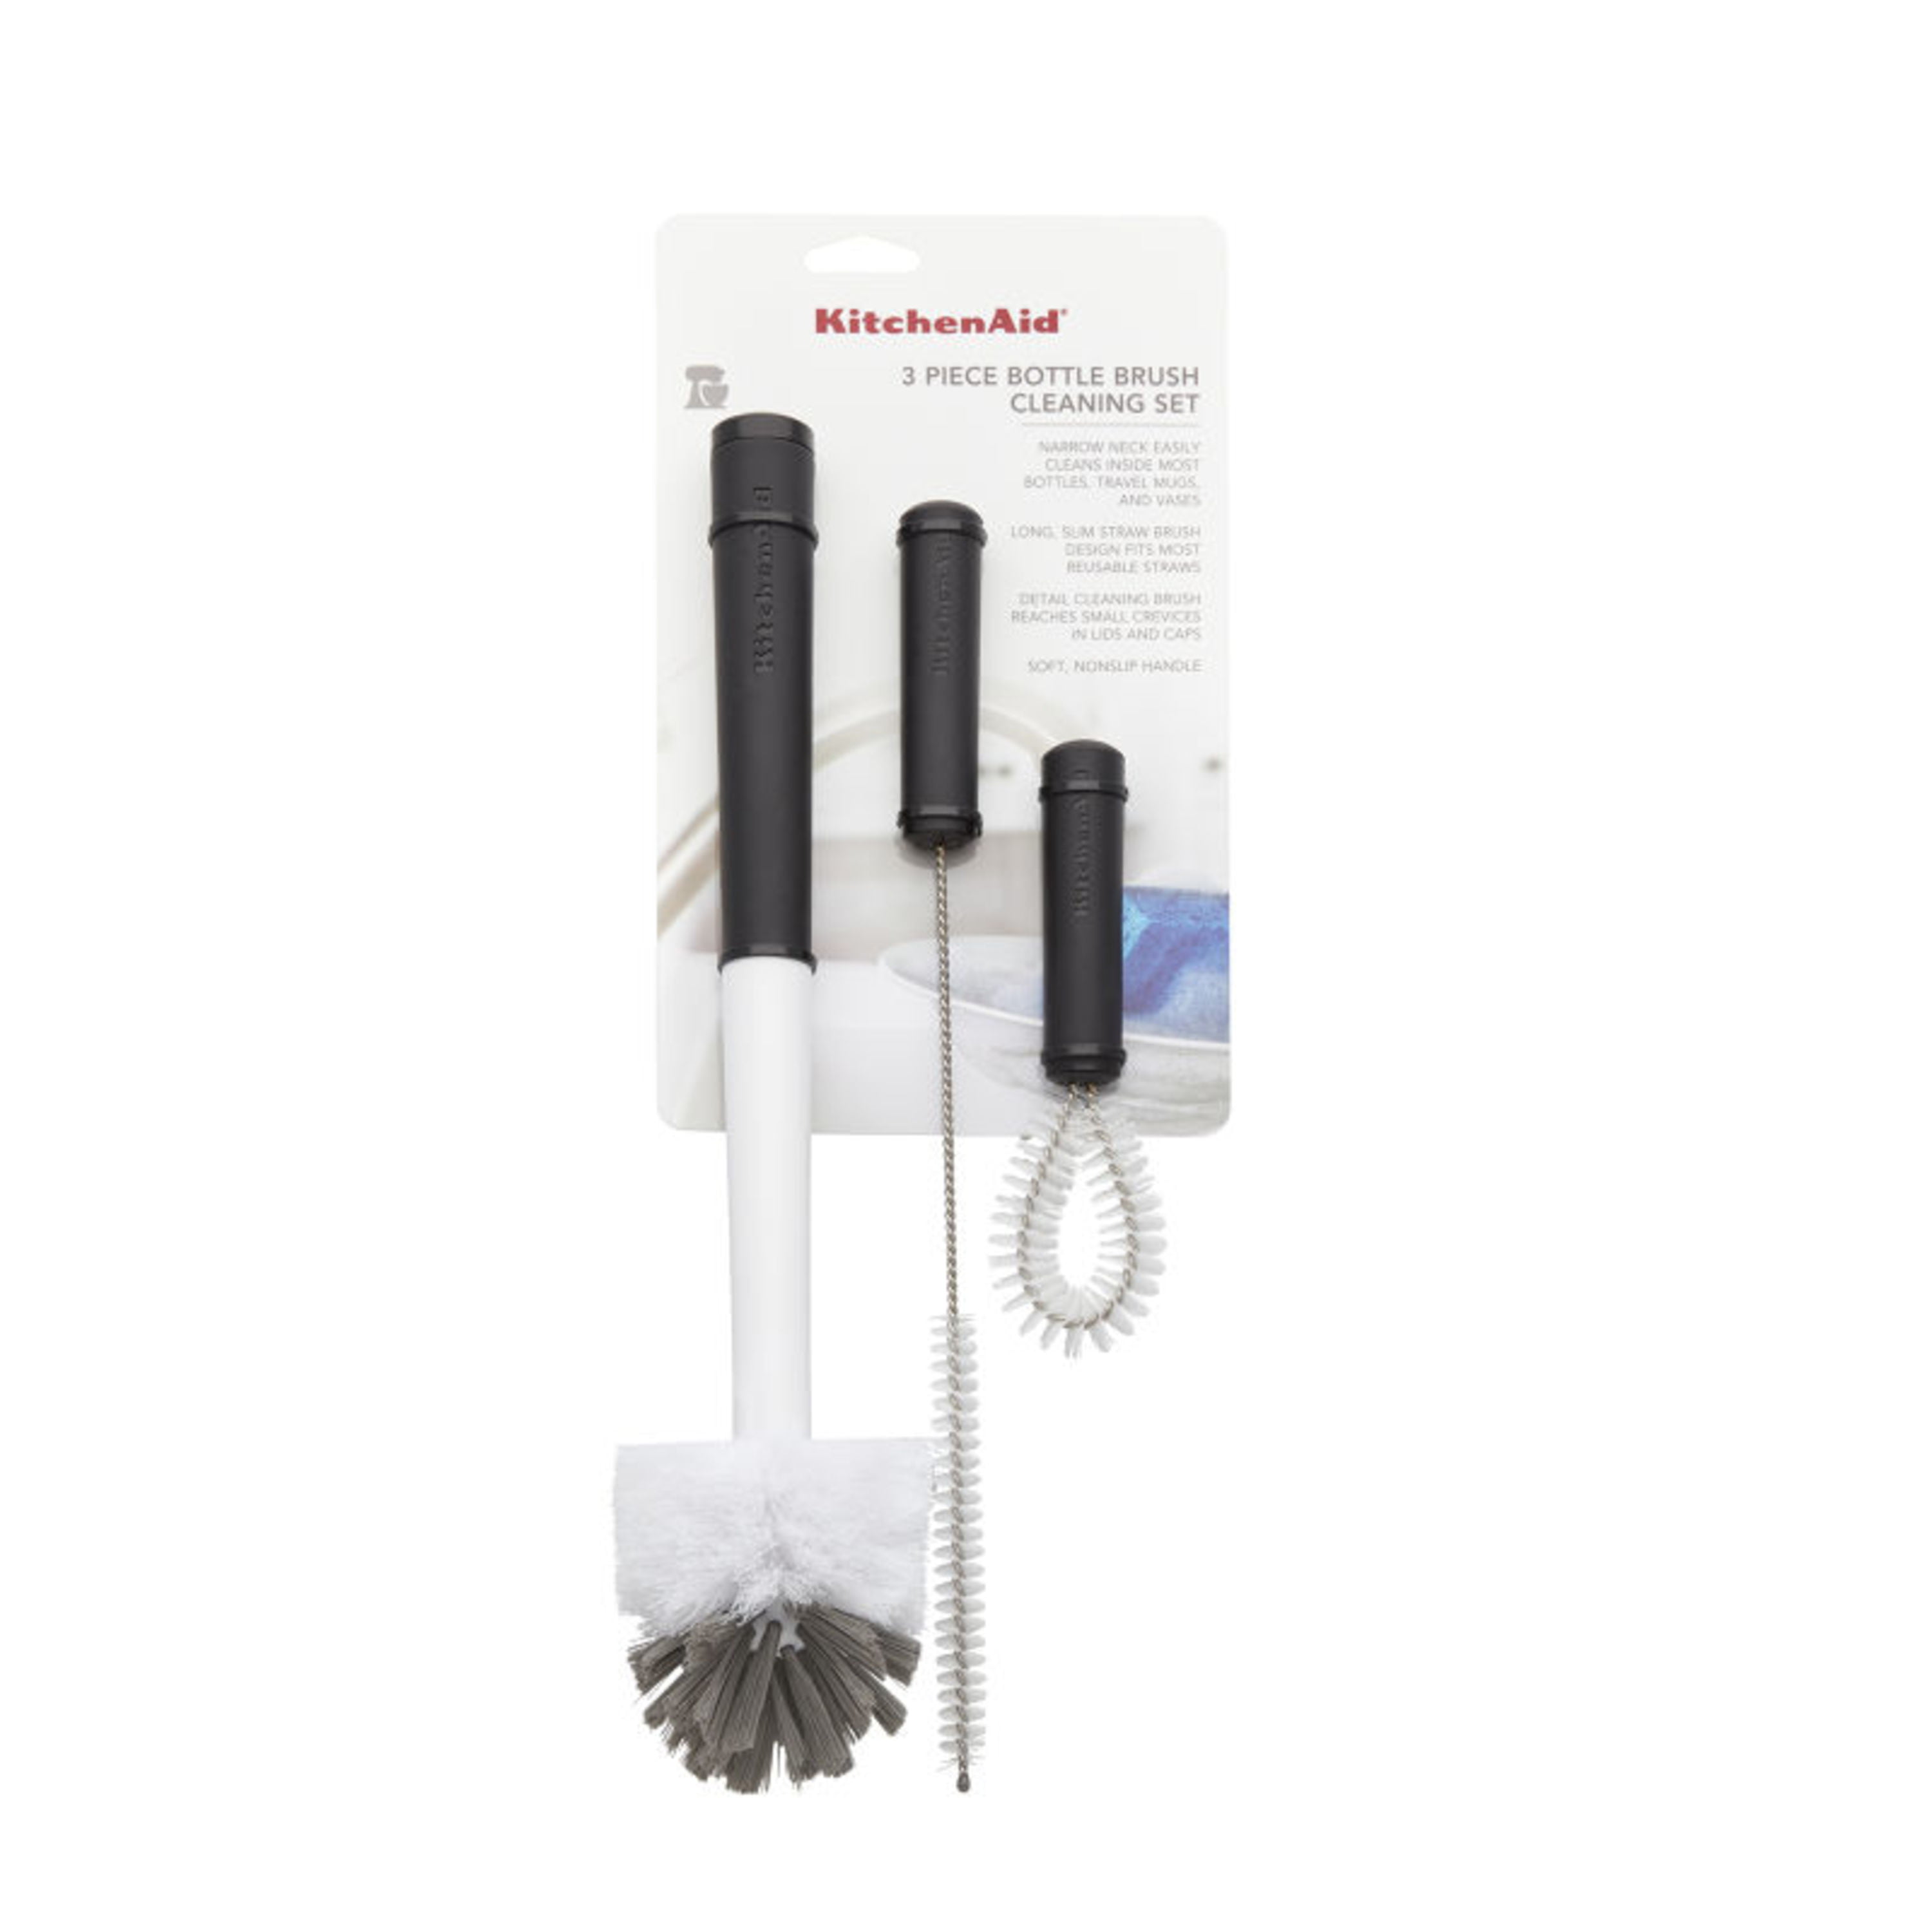 BOTTLE AND SPOUT CLEANING BRUSHES - SET OF 3 - Woodbridge Kitchen